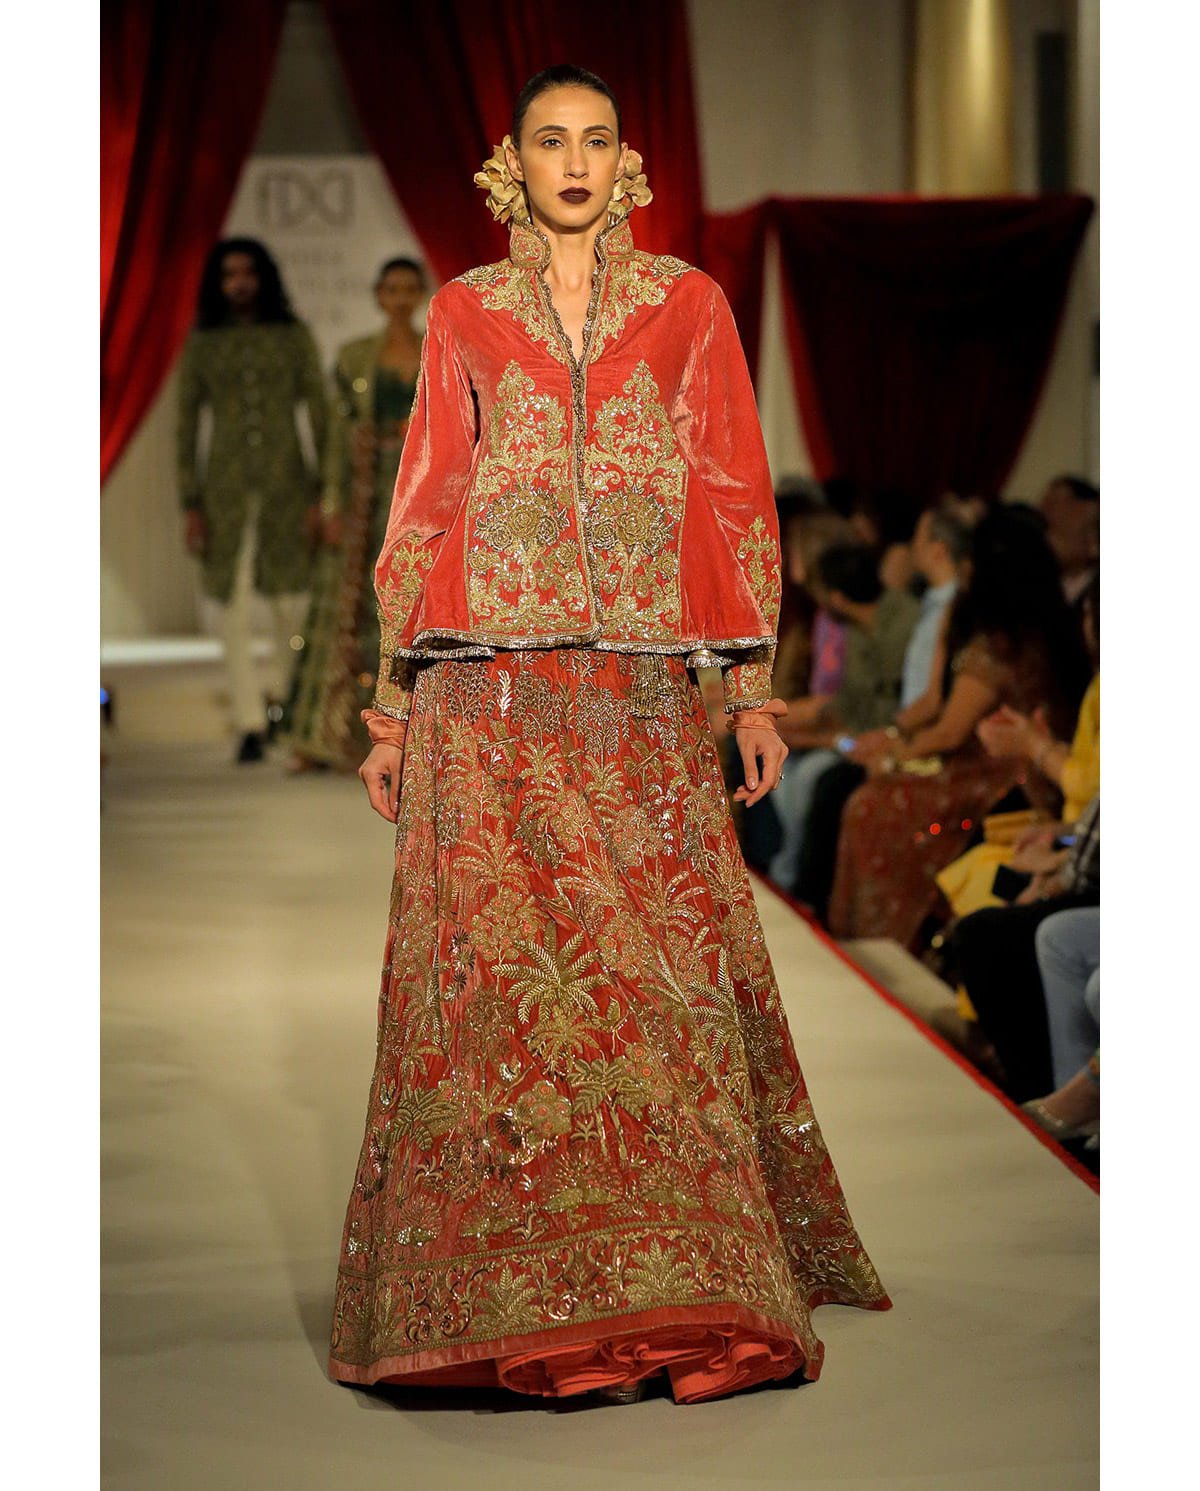 Rohit Bal's Bridal Collection At IBFW 2013 - Boldsky.com